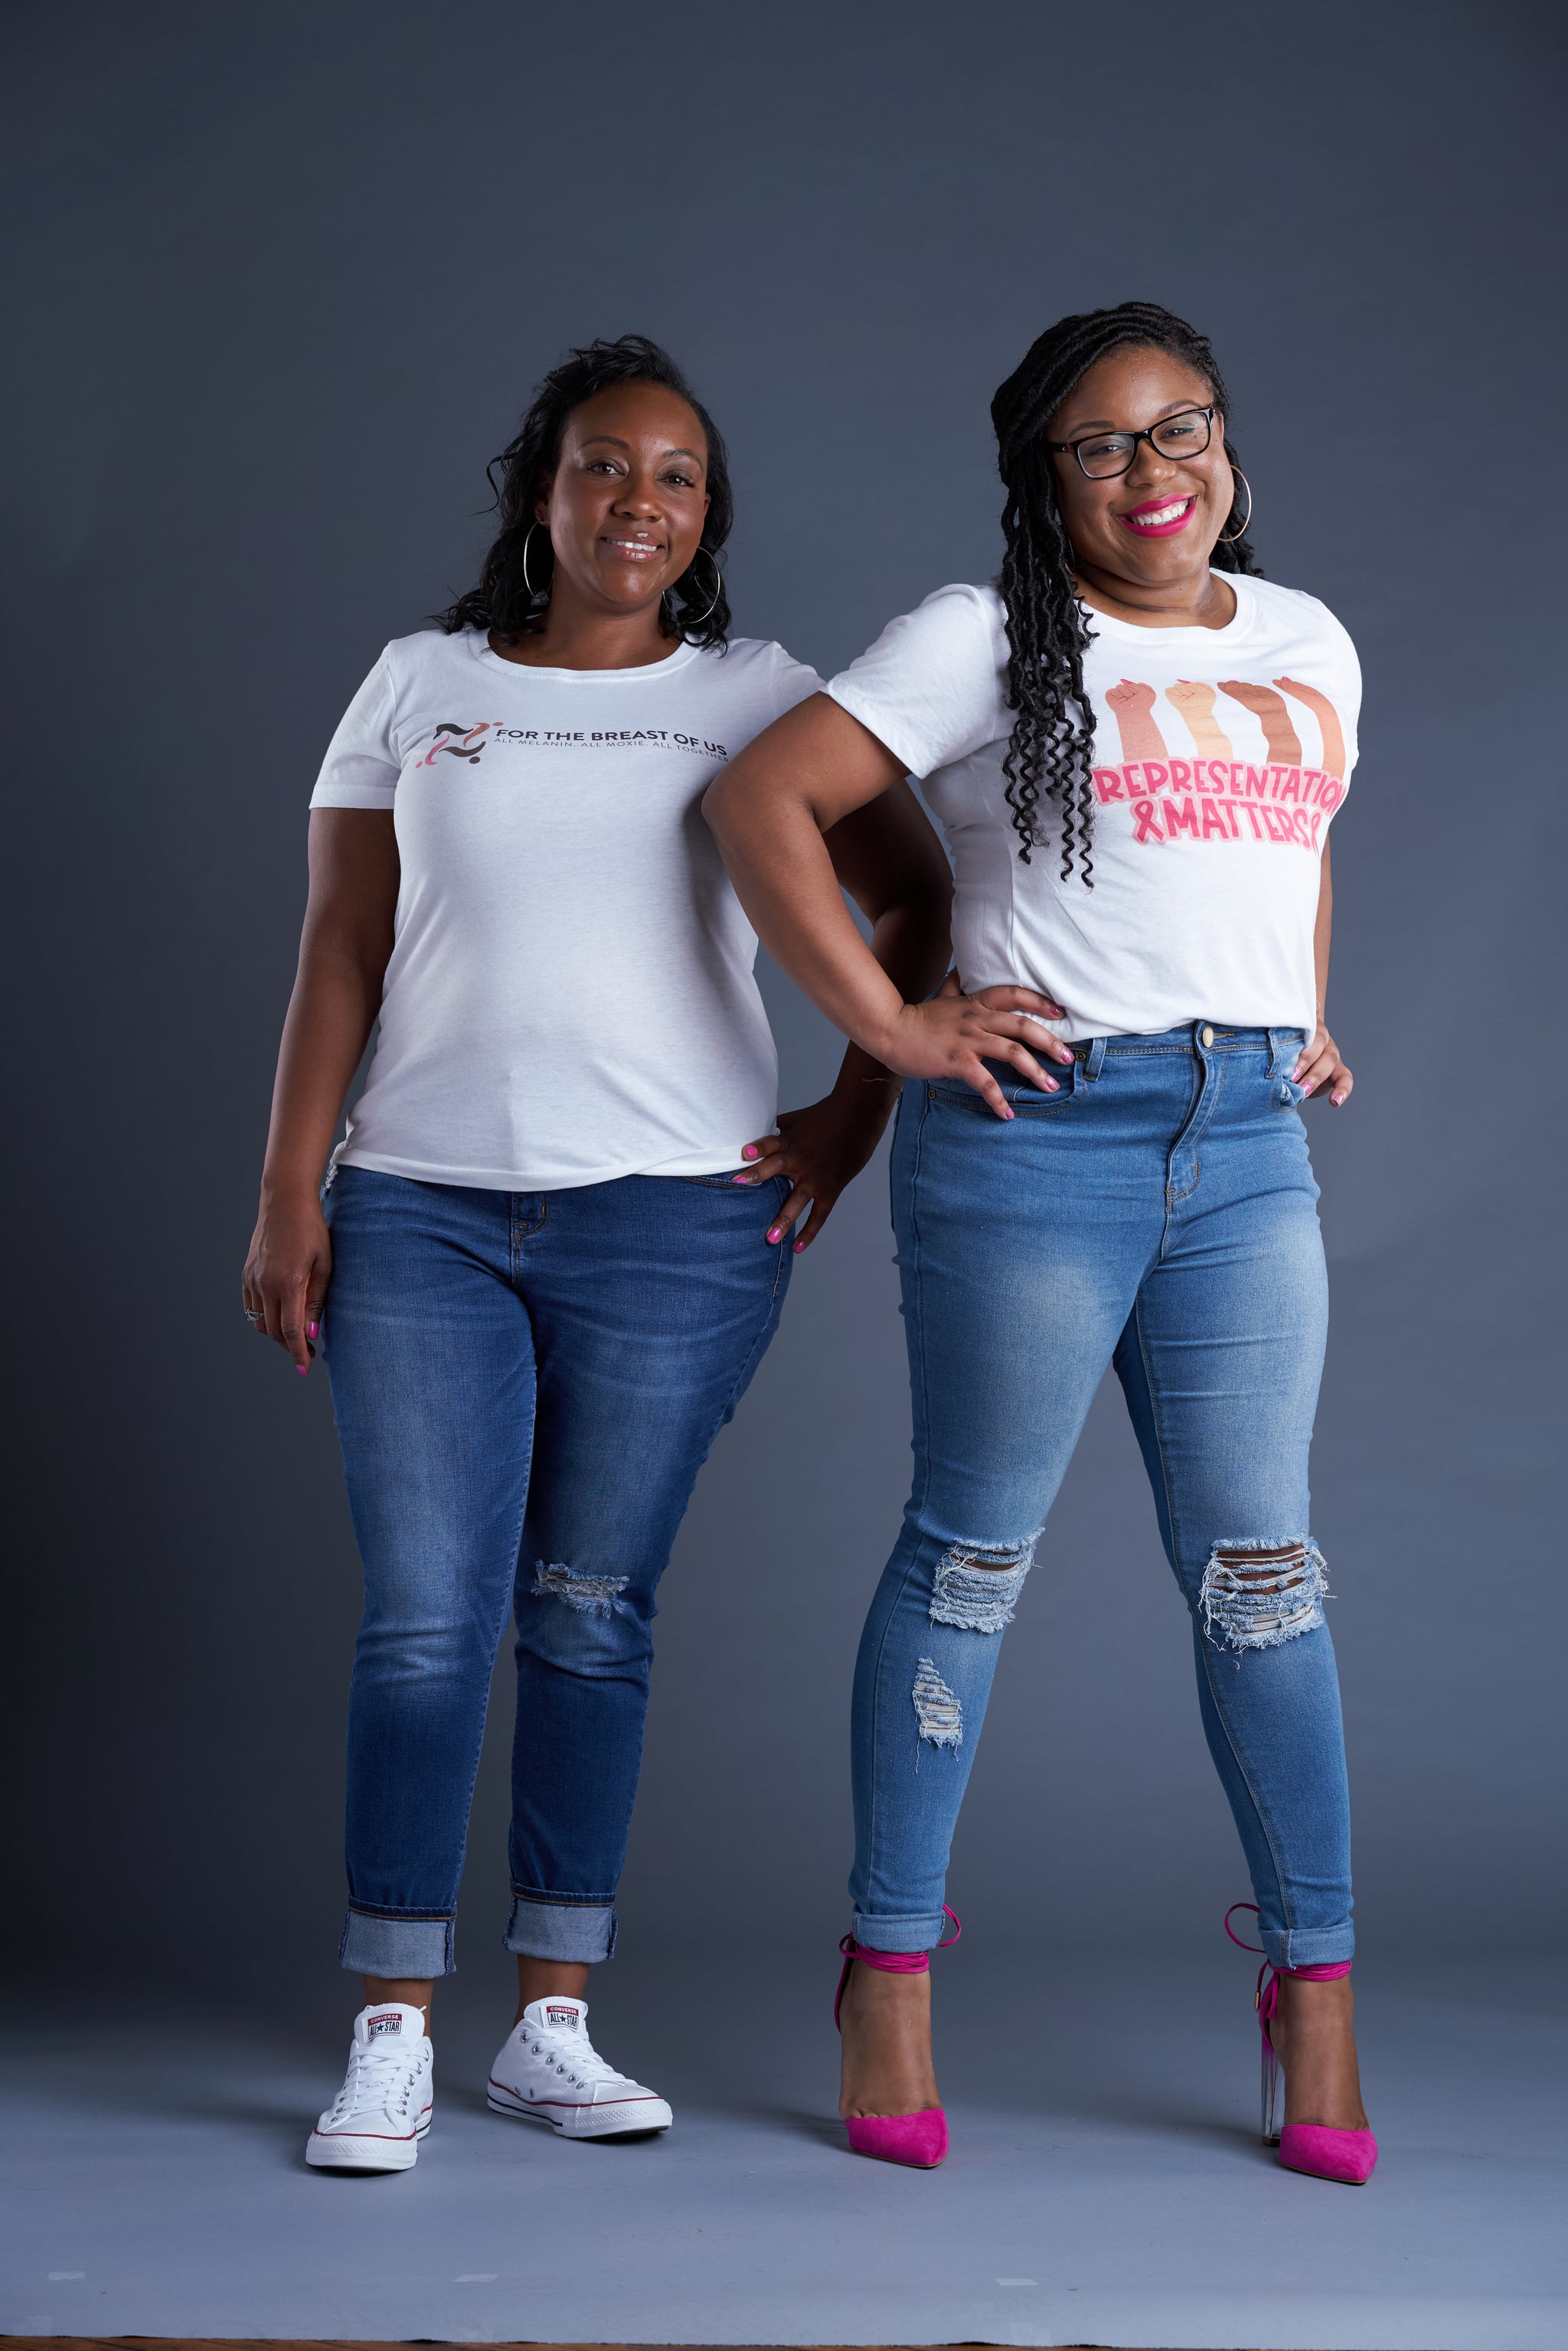 For The Breast of Us Founders (credit: Jay Marable Photography)